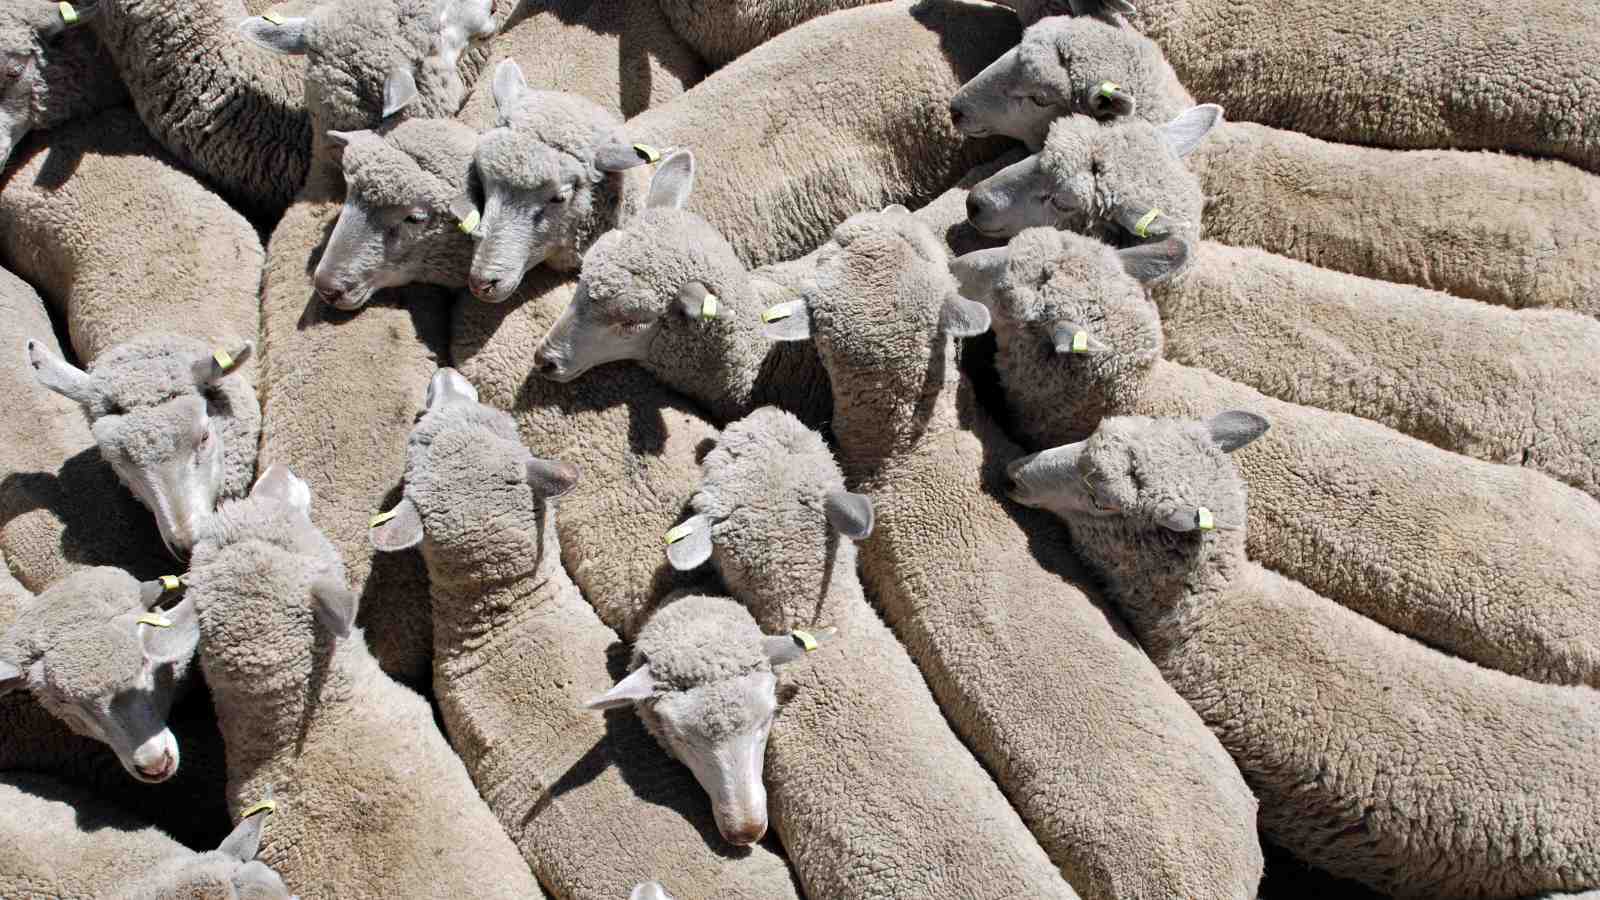 A mob of sheep.